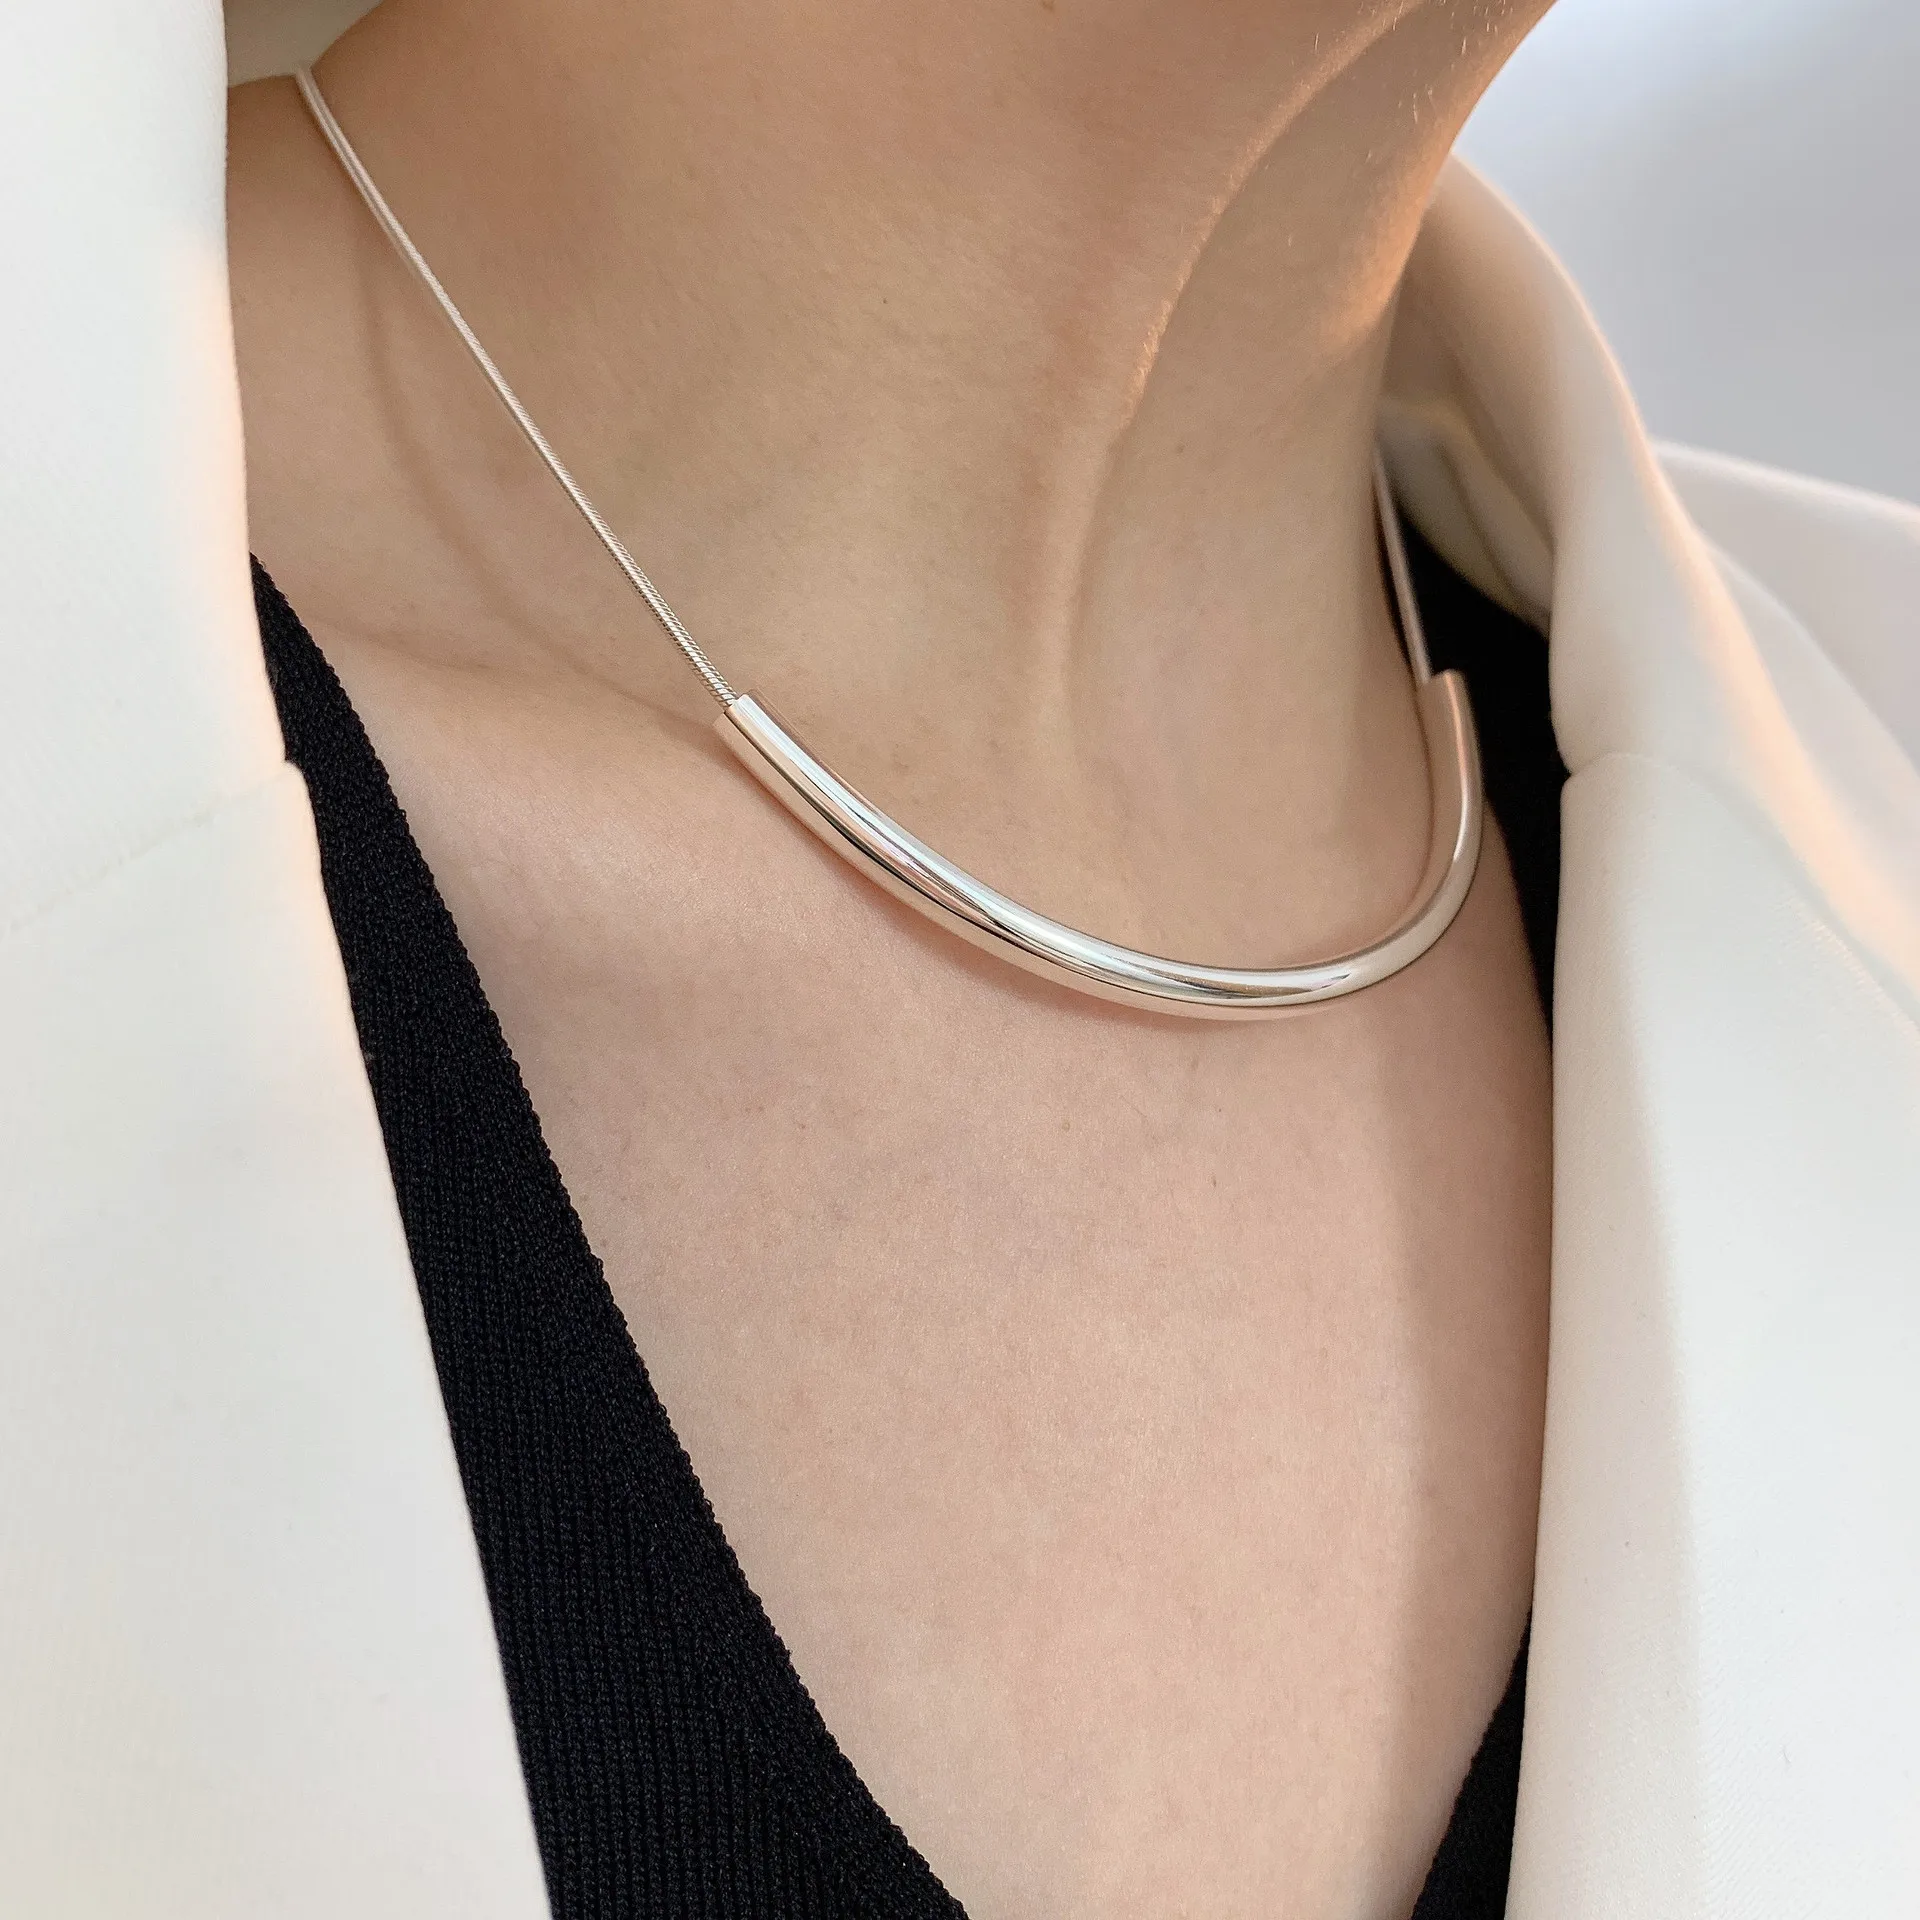 

New Fashion 925 Sterling Silver Arc Line Snake Chain Geometric Punk Pendant Necklace for Women Girl Jewelry Dropship Wholesale